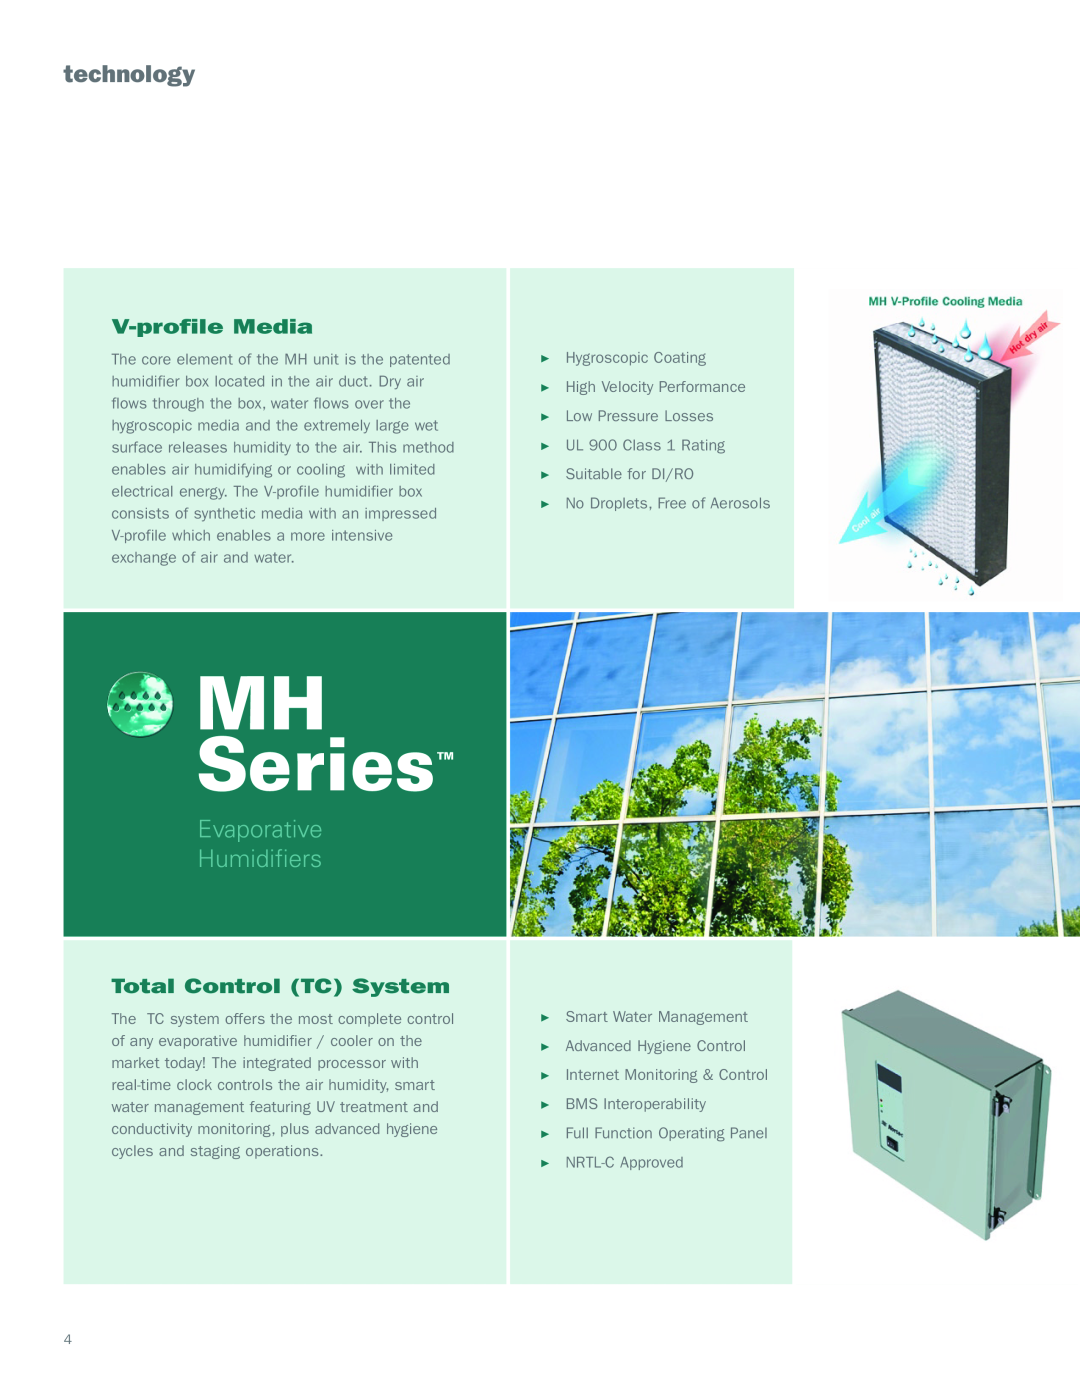 Nortec Industries MH Series manual technology, V-profileMedia, Total Control TC System, Evaporative Humidifiers 